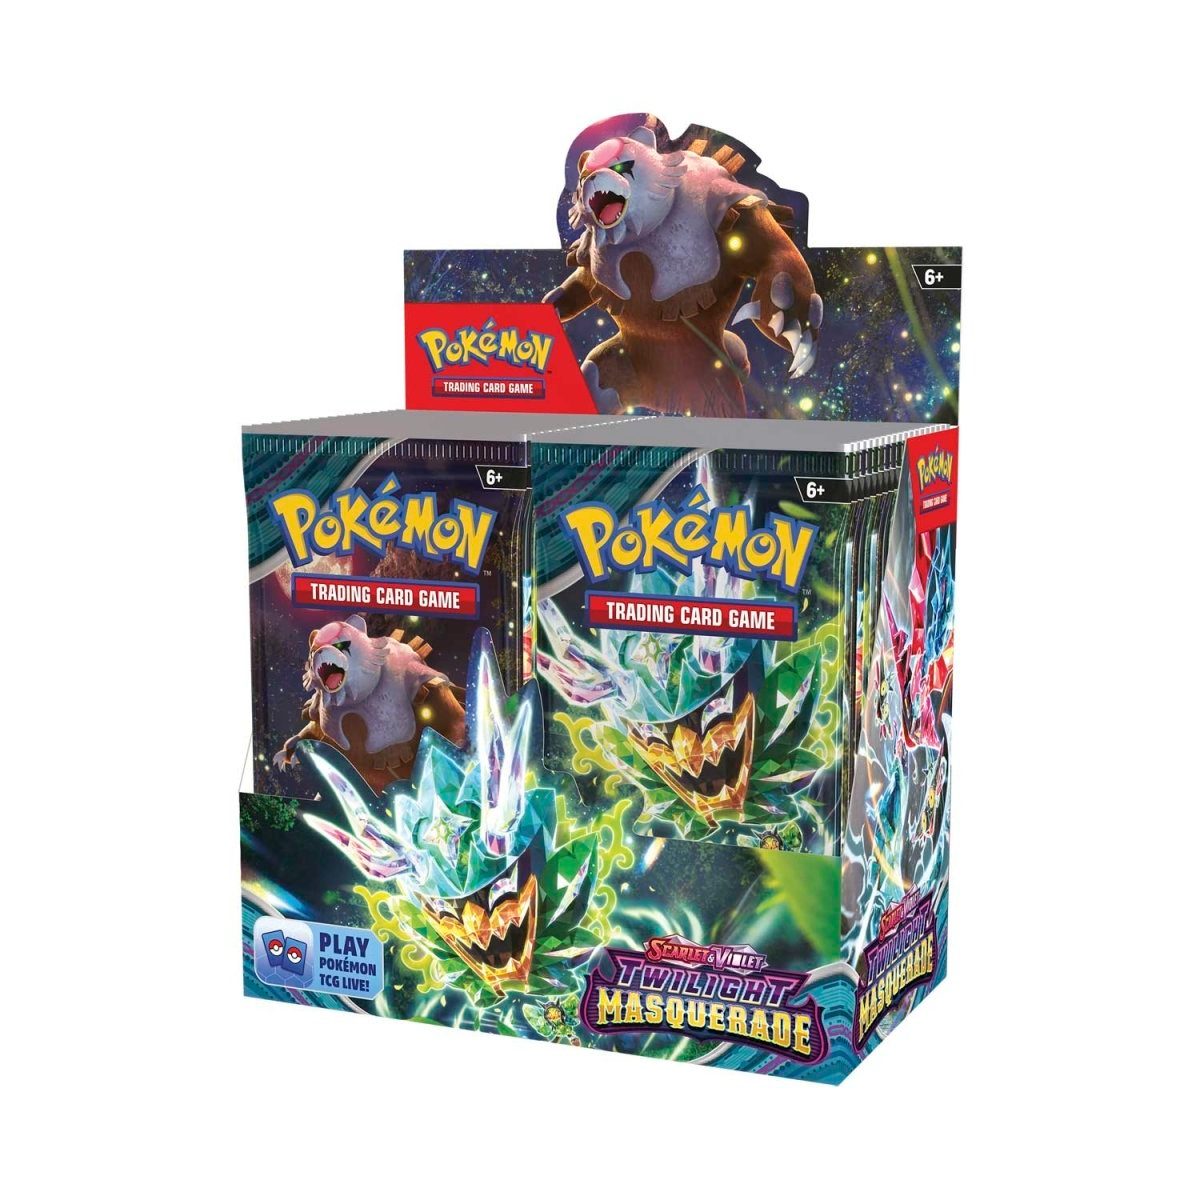 Twilight Masquerade Booster Box - Game On